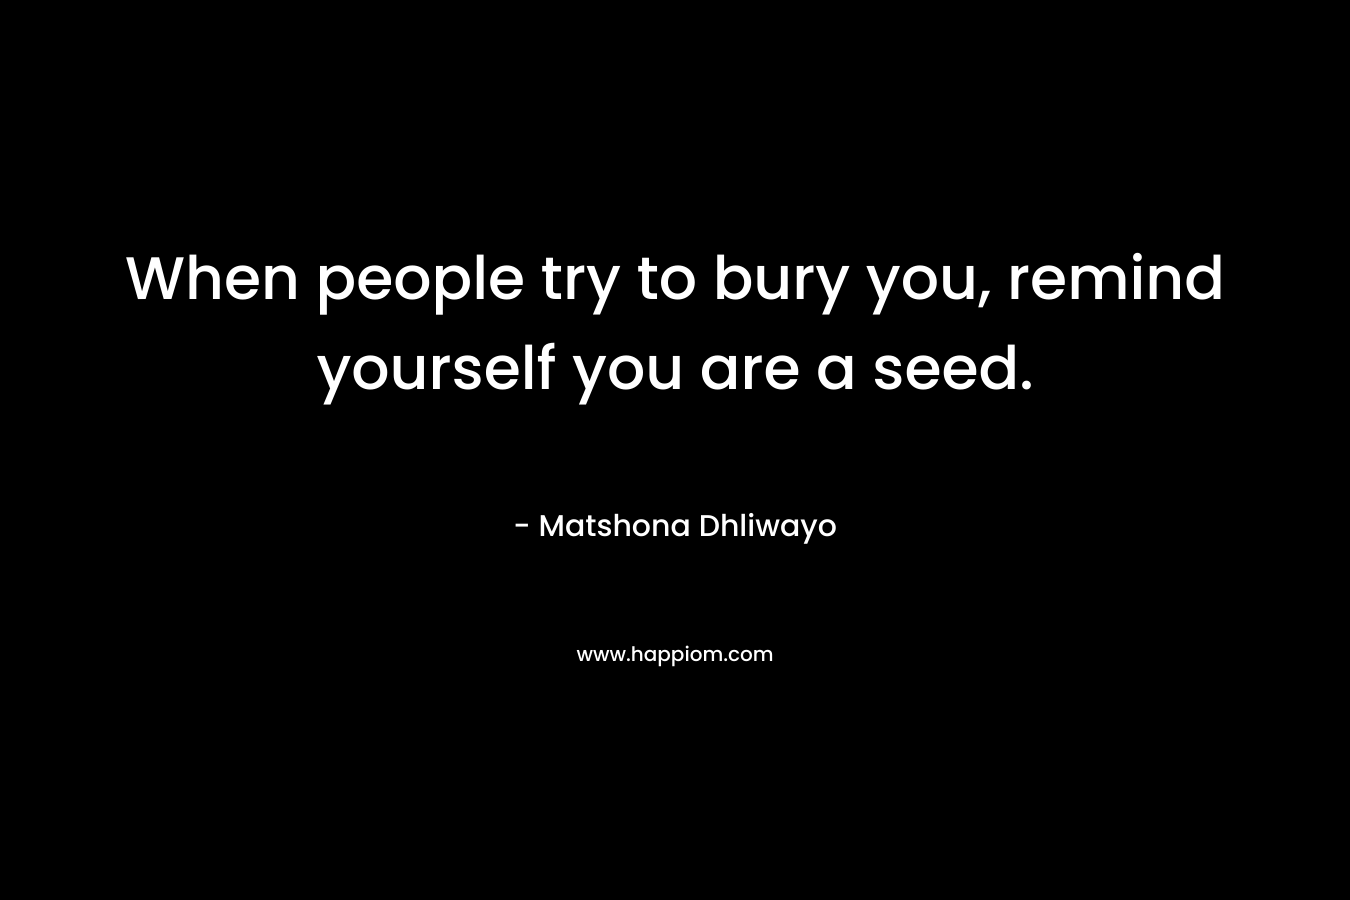 When people try to bury you, remind yourself you are a seed.